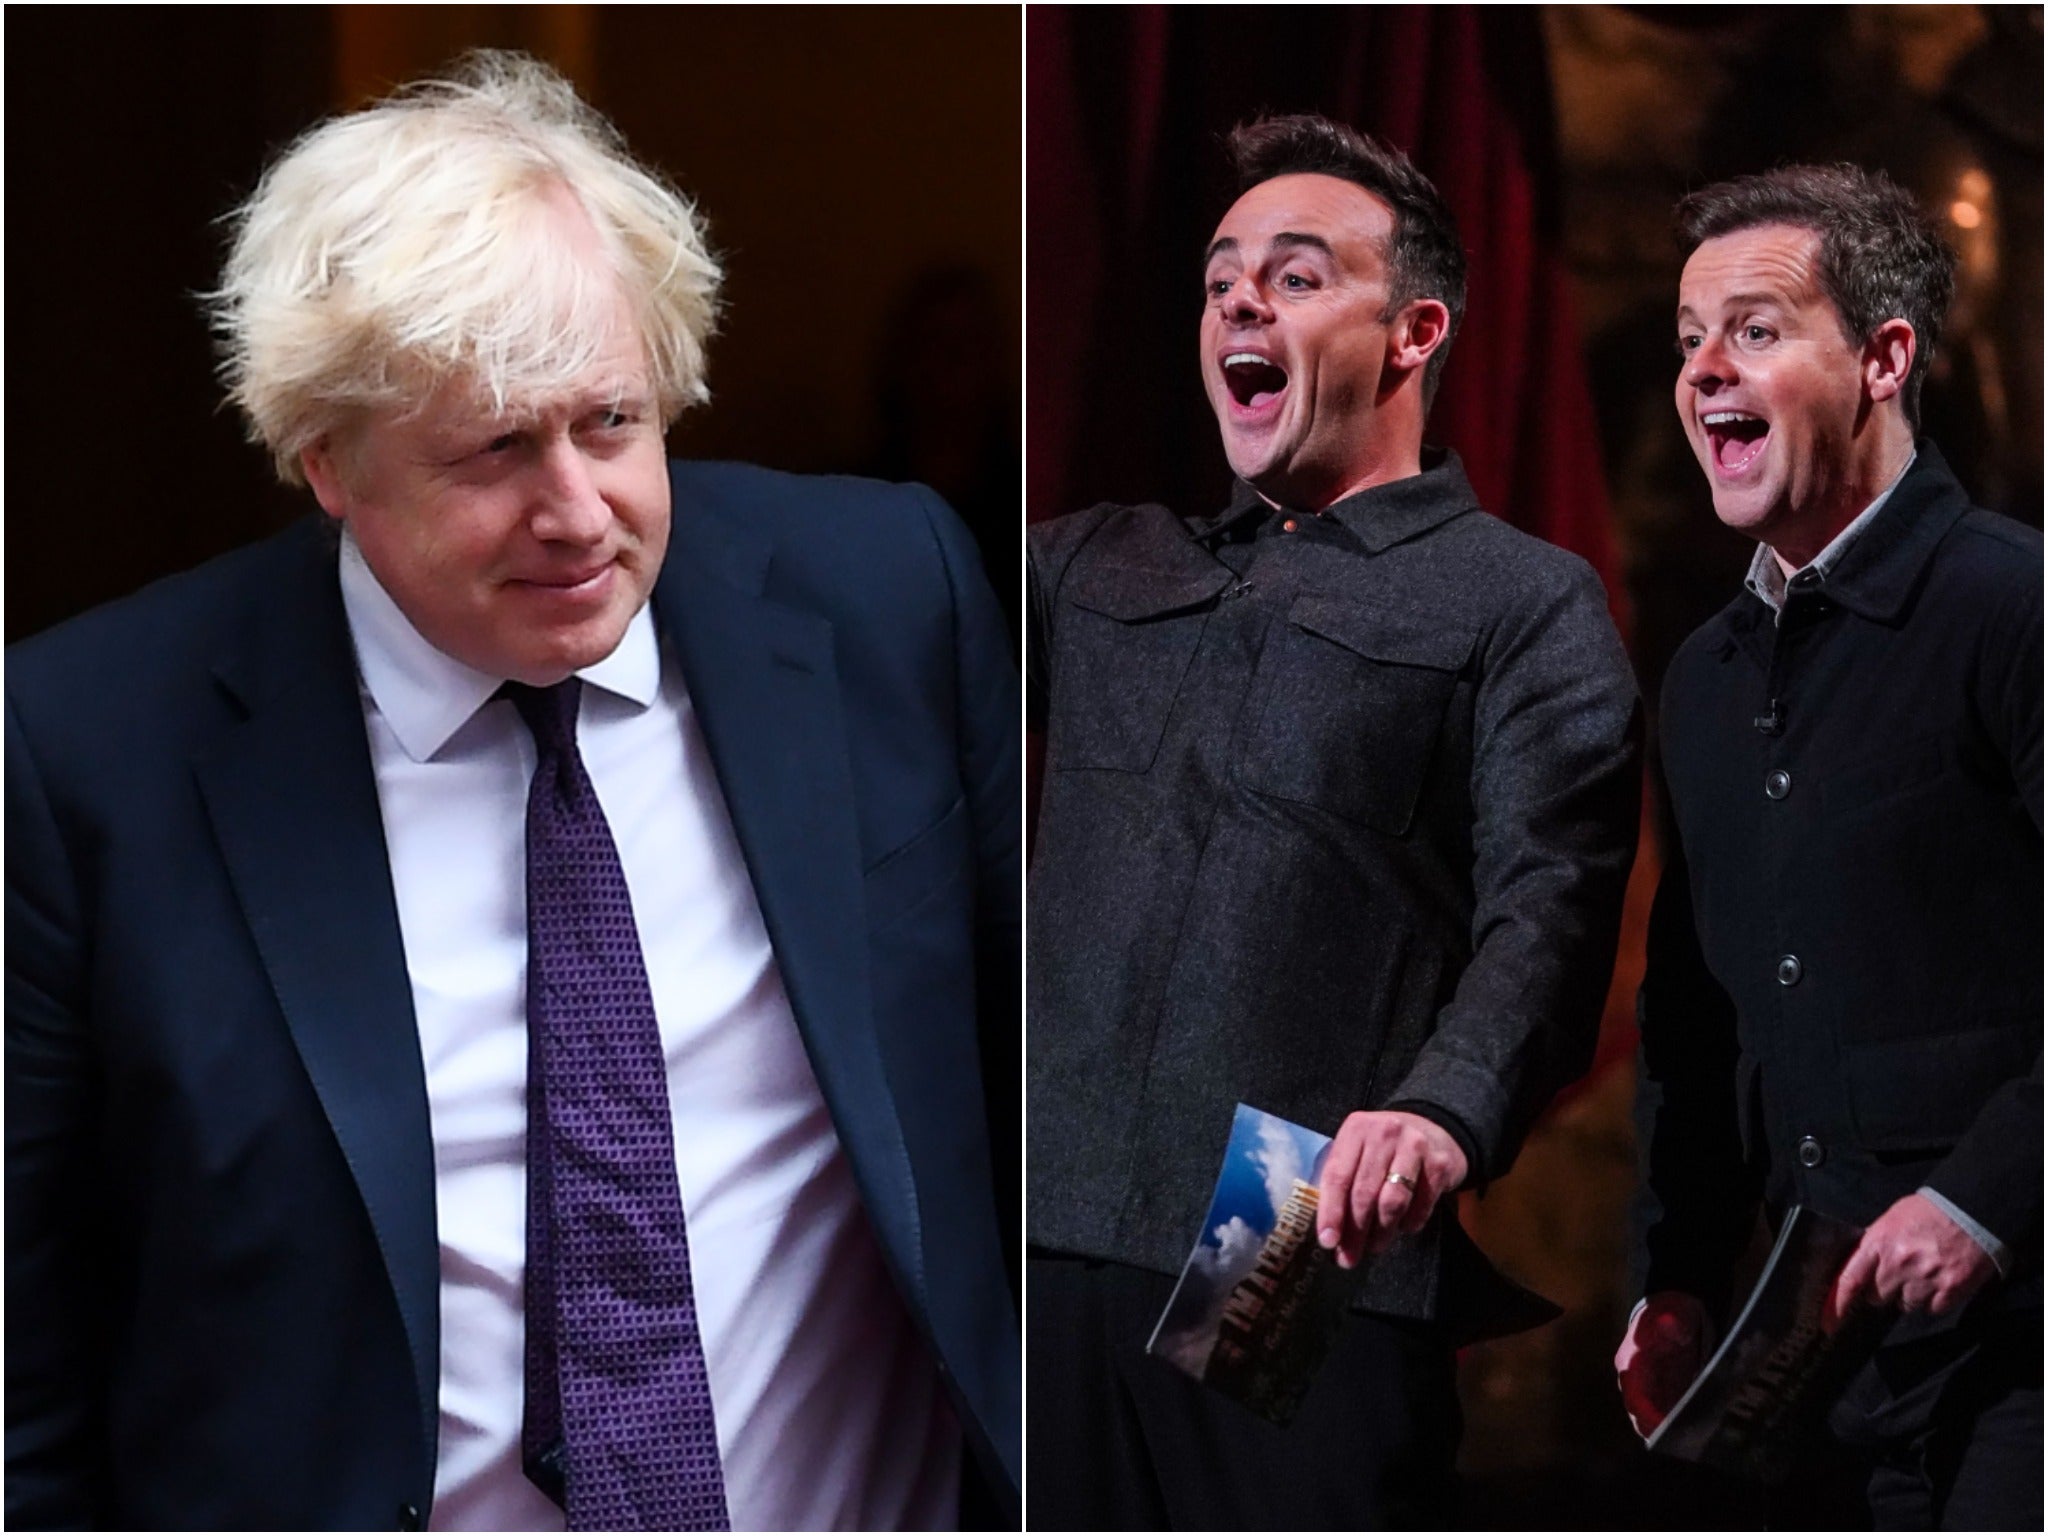 Until now, Ant and Dec have kept their political cards reasonably close to their chests